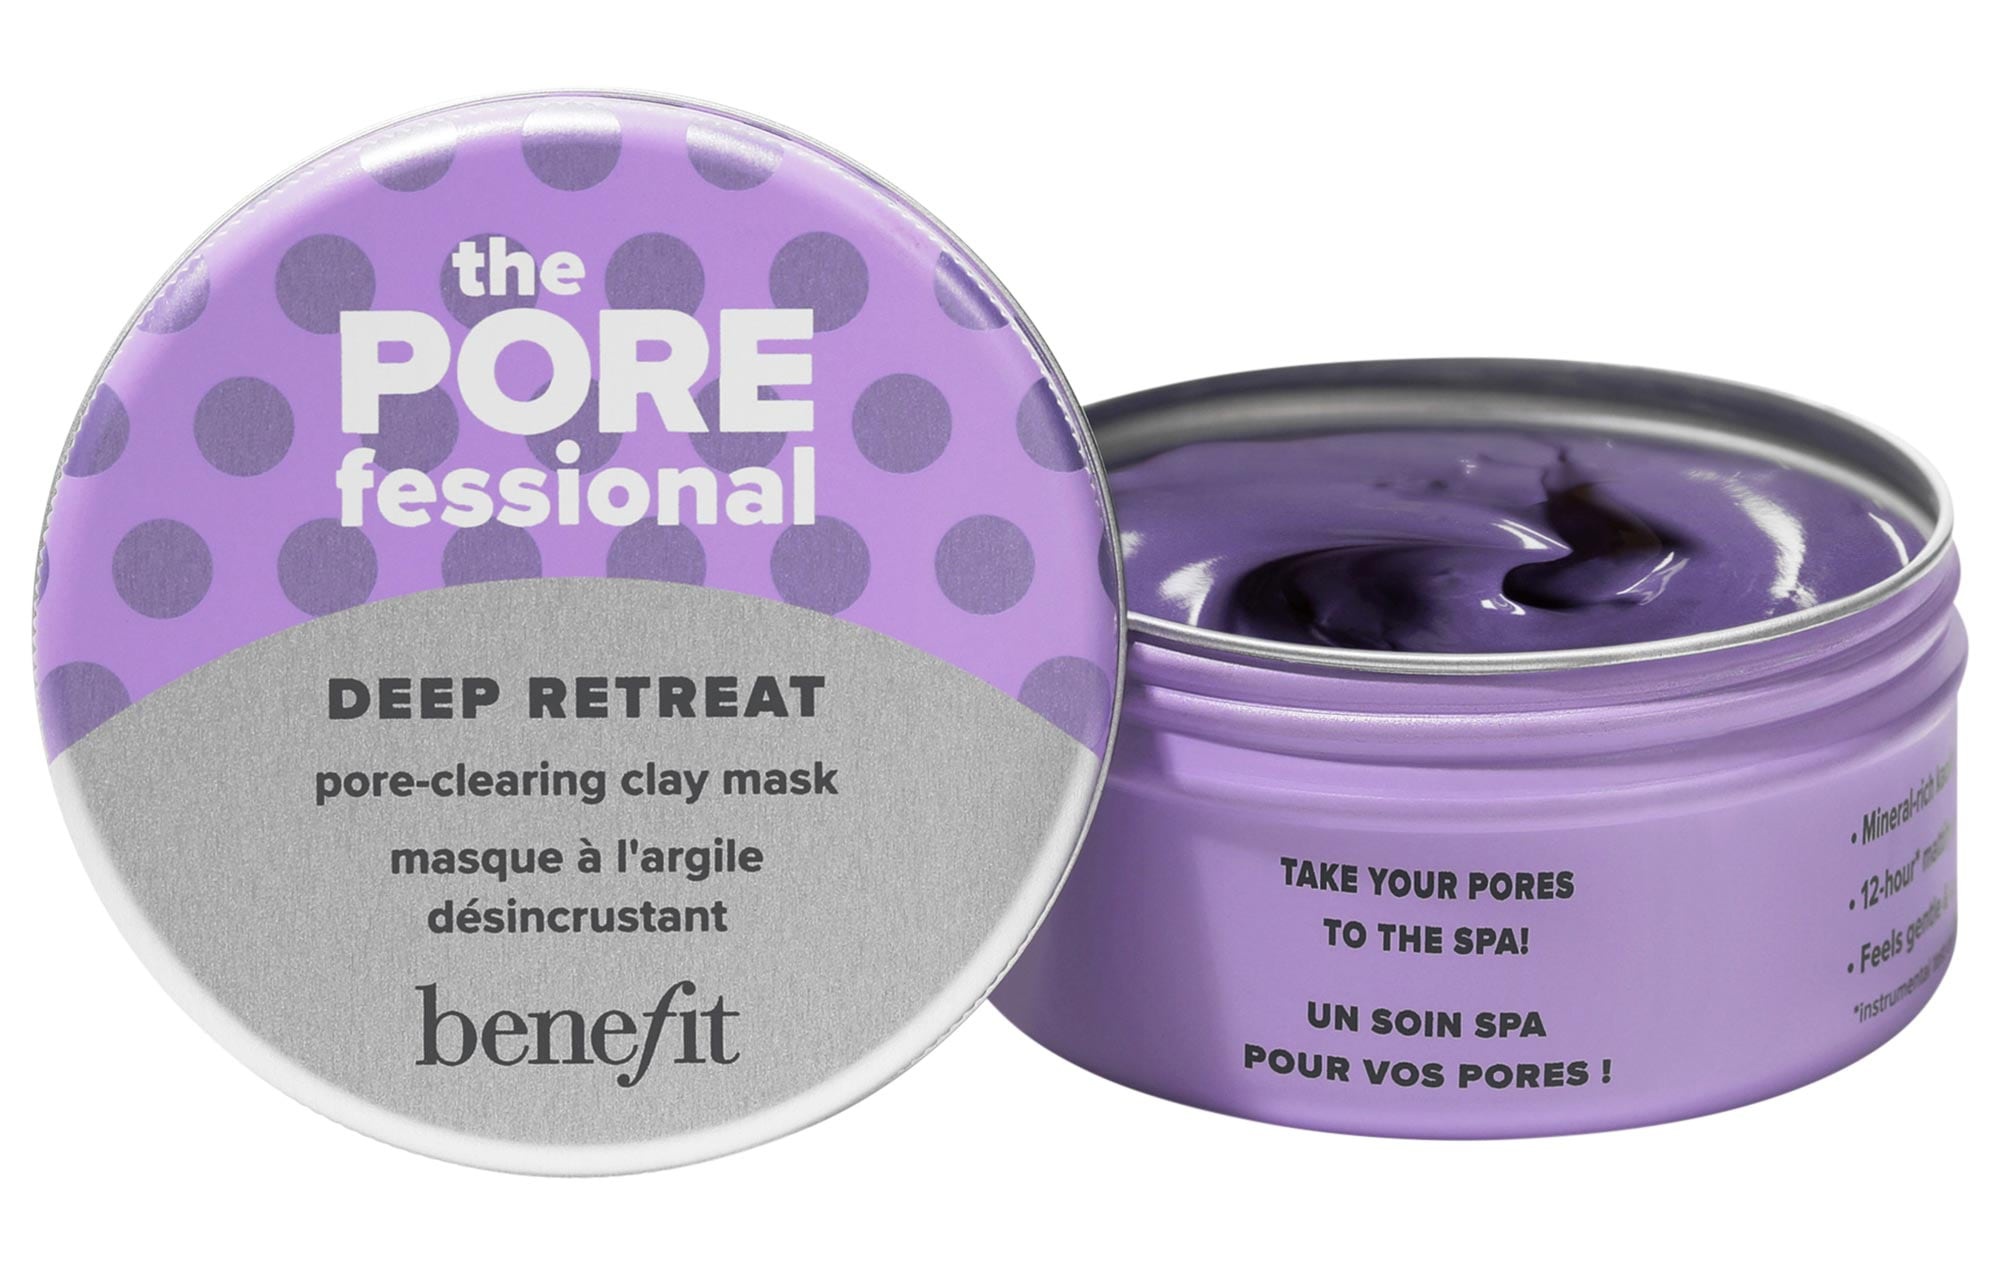 Benefit Cosmetics The Porefessional Deep Retreat Pore-clearing Clay Mask